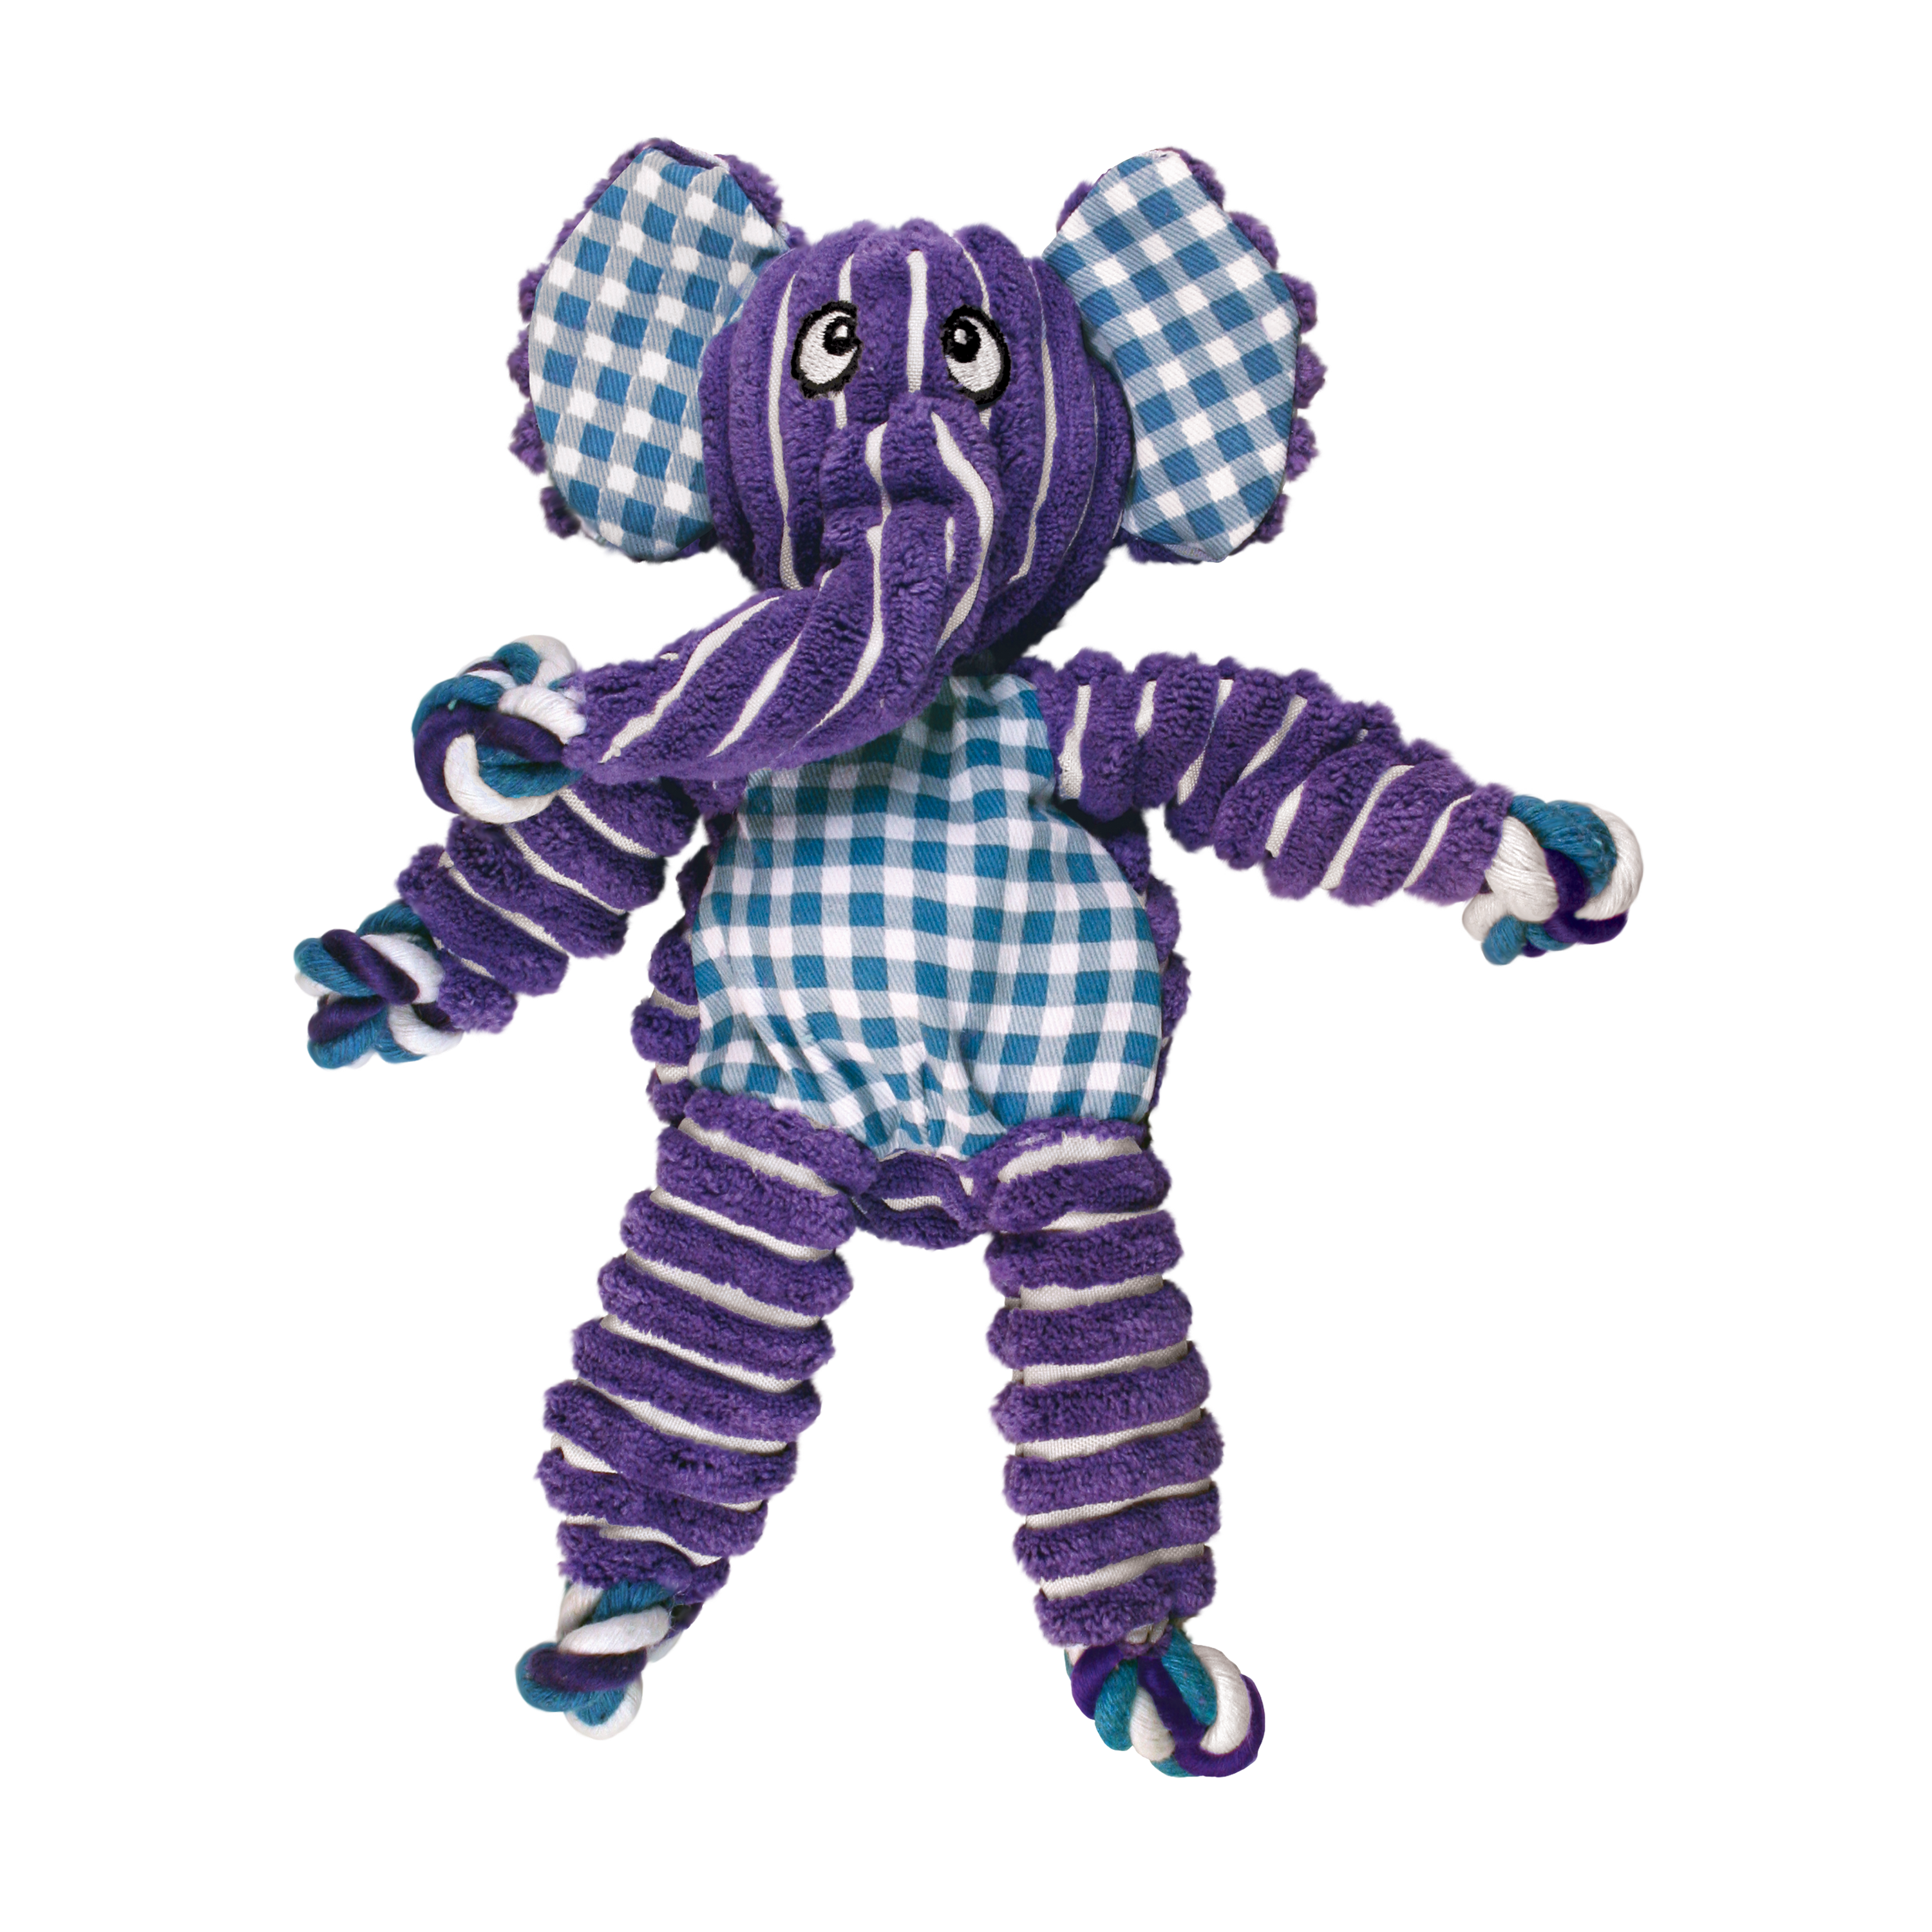 Floppy Knots Elephant offpack product image